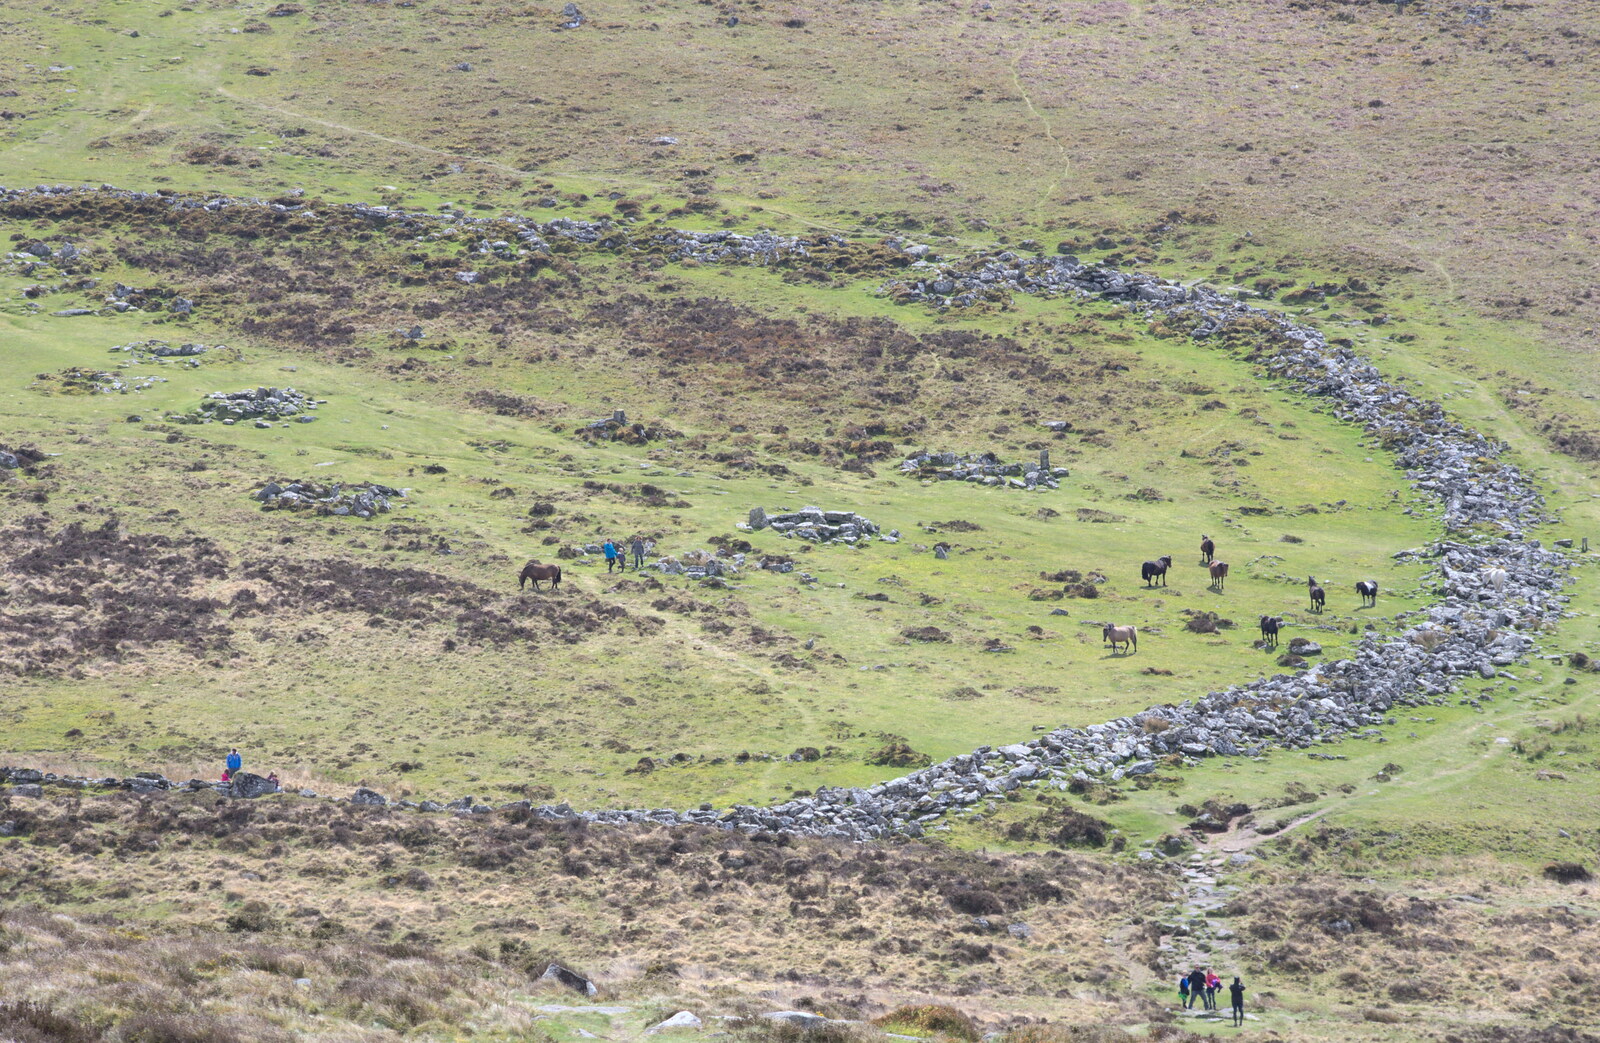 Grimspound's circular wall from A Barbeque, Grimspound and Pizza, Dartmoor and Exeter, Devon - 15th April 2017